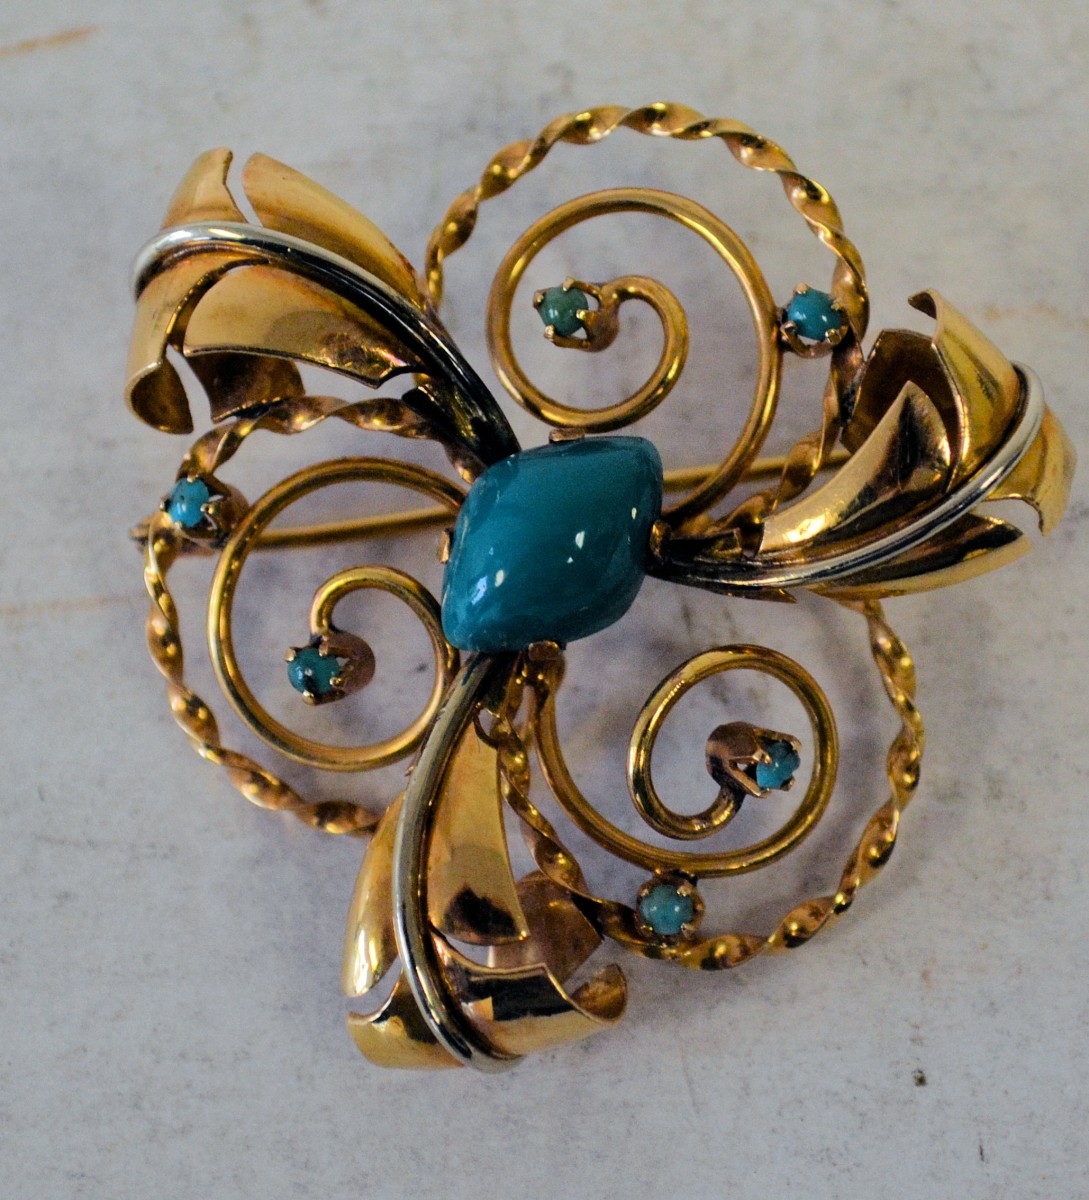 A 15ct Pierced Scalloped Shape Brooch having leaf motifs inset with turquoise 11.8gms gross